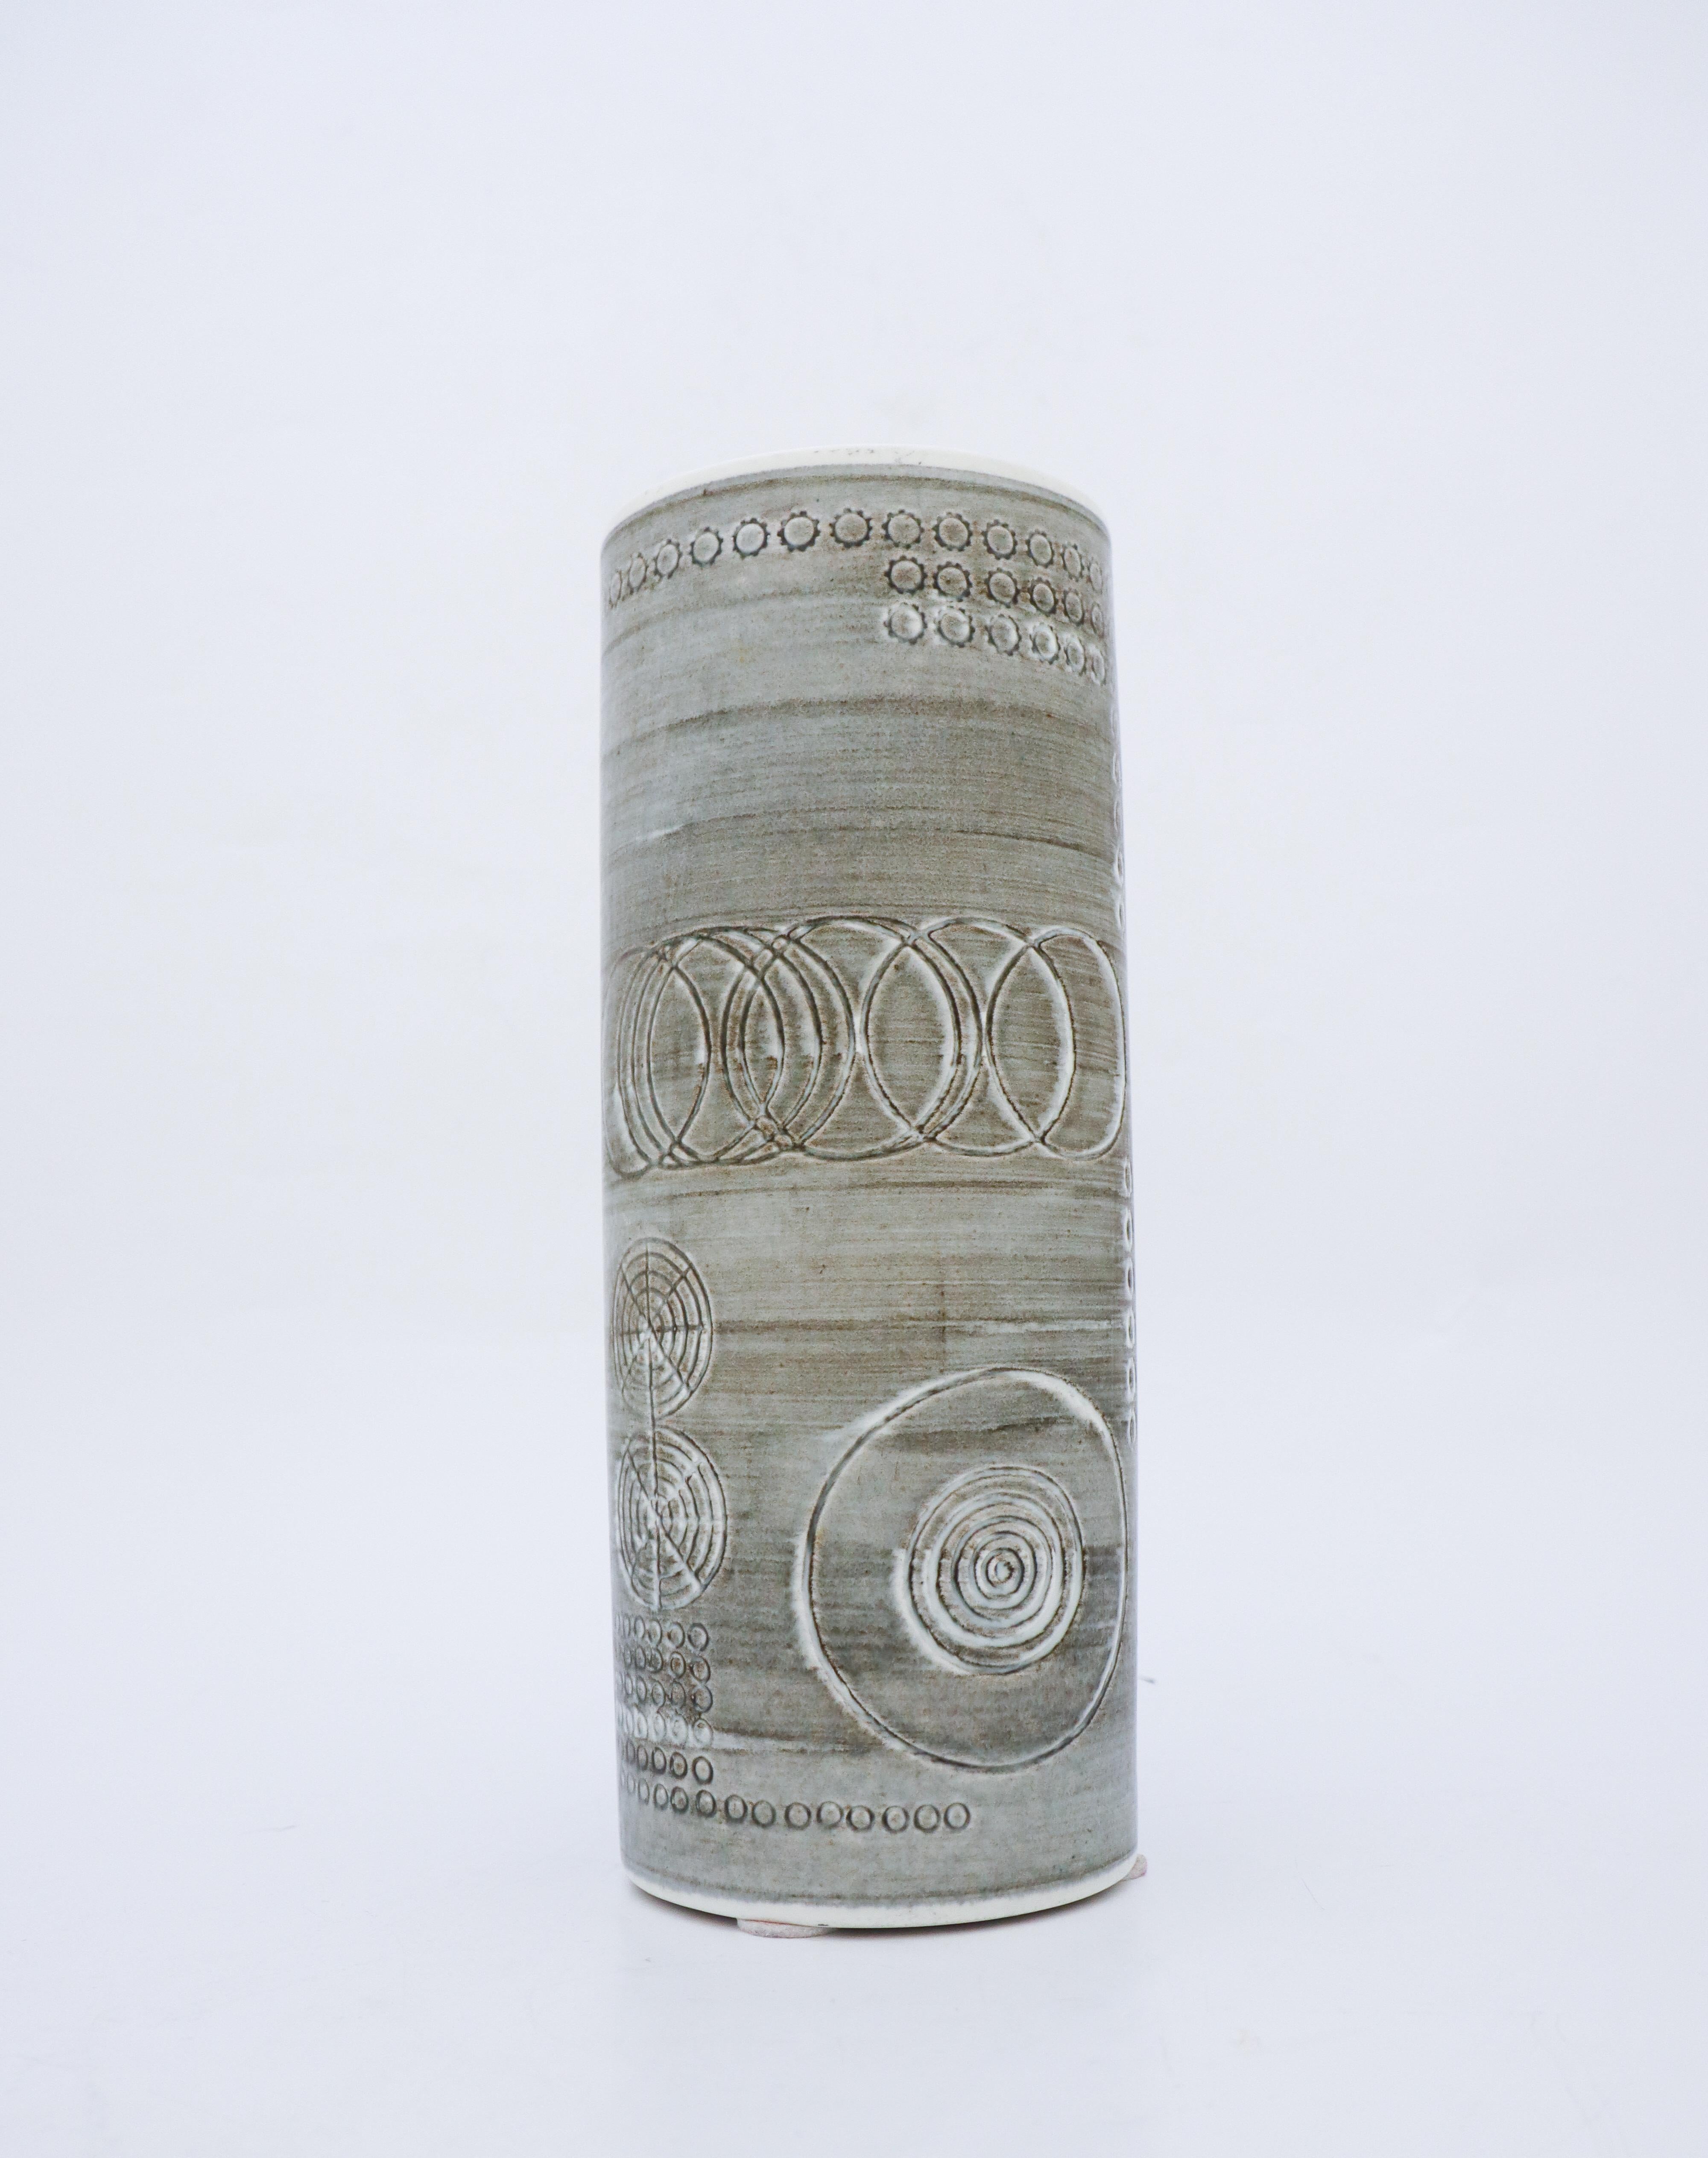 A large gray vase of model Sarek designed by Olle Alberius at Rörstrand. The vase is 12 cm (4.8